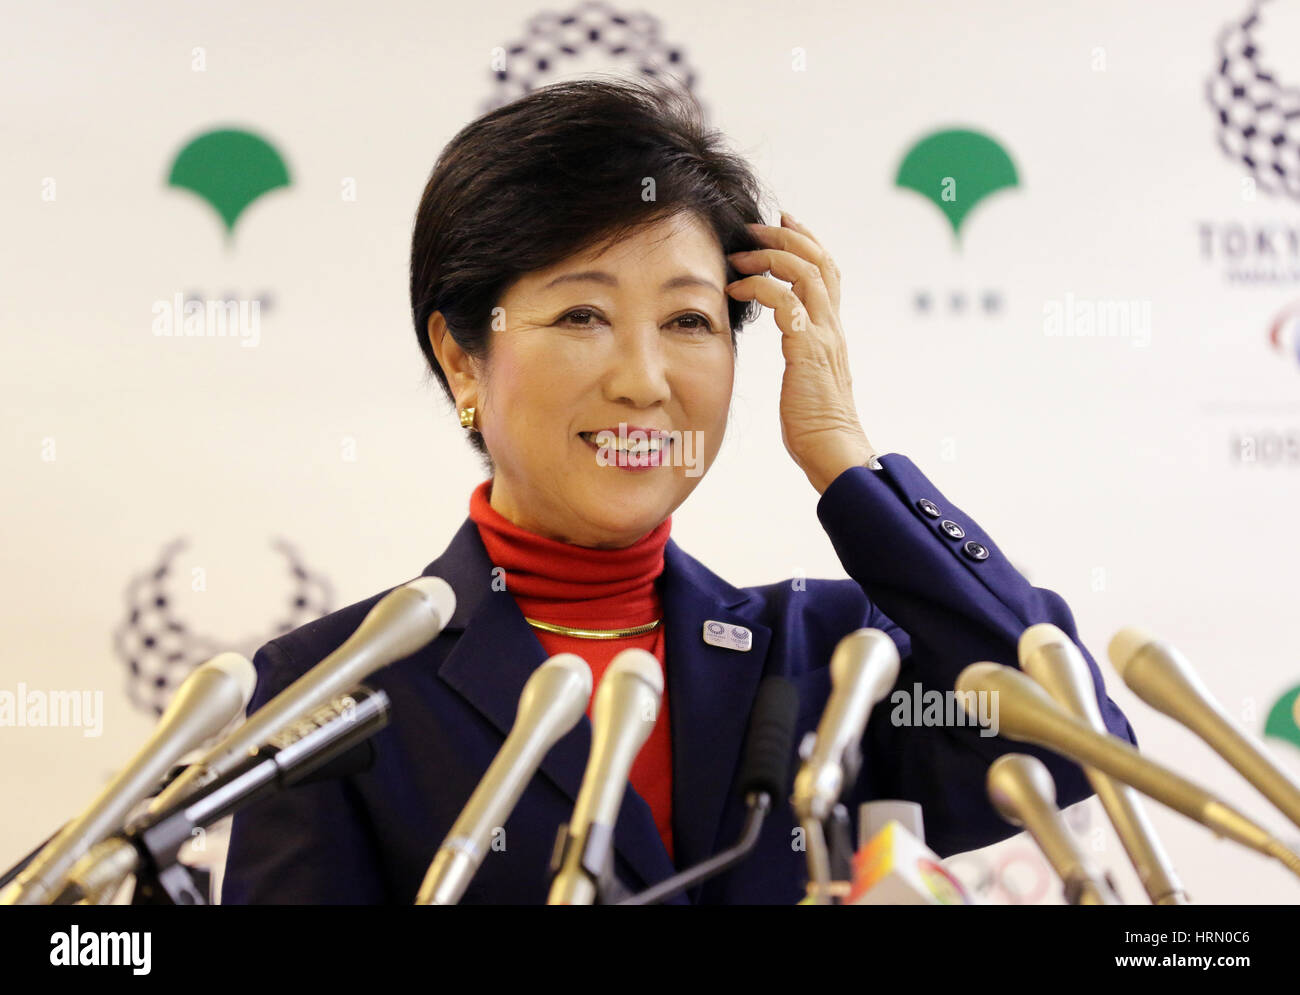 Tokyo, Japan. 3rd March 2017. Tokyo Governor Yuriko Koike speaks before press at the Tokyo Metropolitan Governemnt office in Tokyo on Friday, March 3, 2017. Former Tokyo Governor Shintaro Ishihara held a press conference and he said Koike had responsibility for the Tsukiji market relocation problem. Credit: Yoshio Tsunoda/AFLO/Alamy Live News Stock Photo